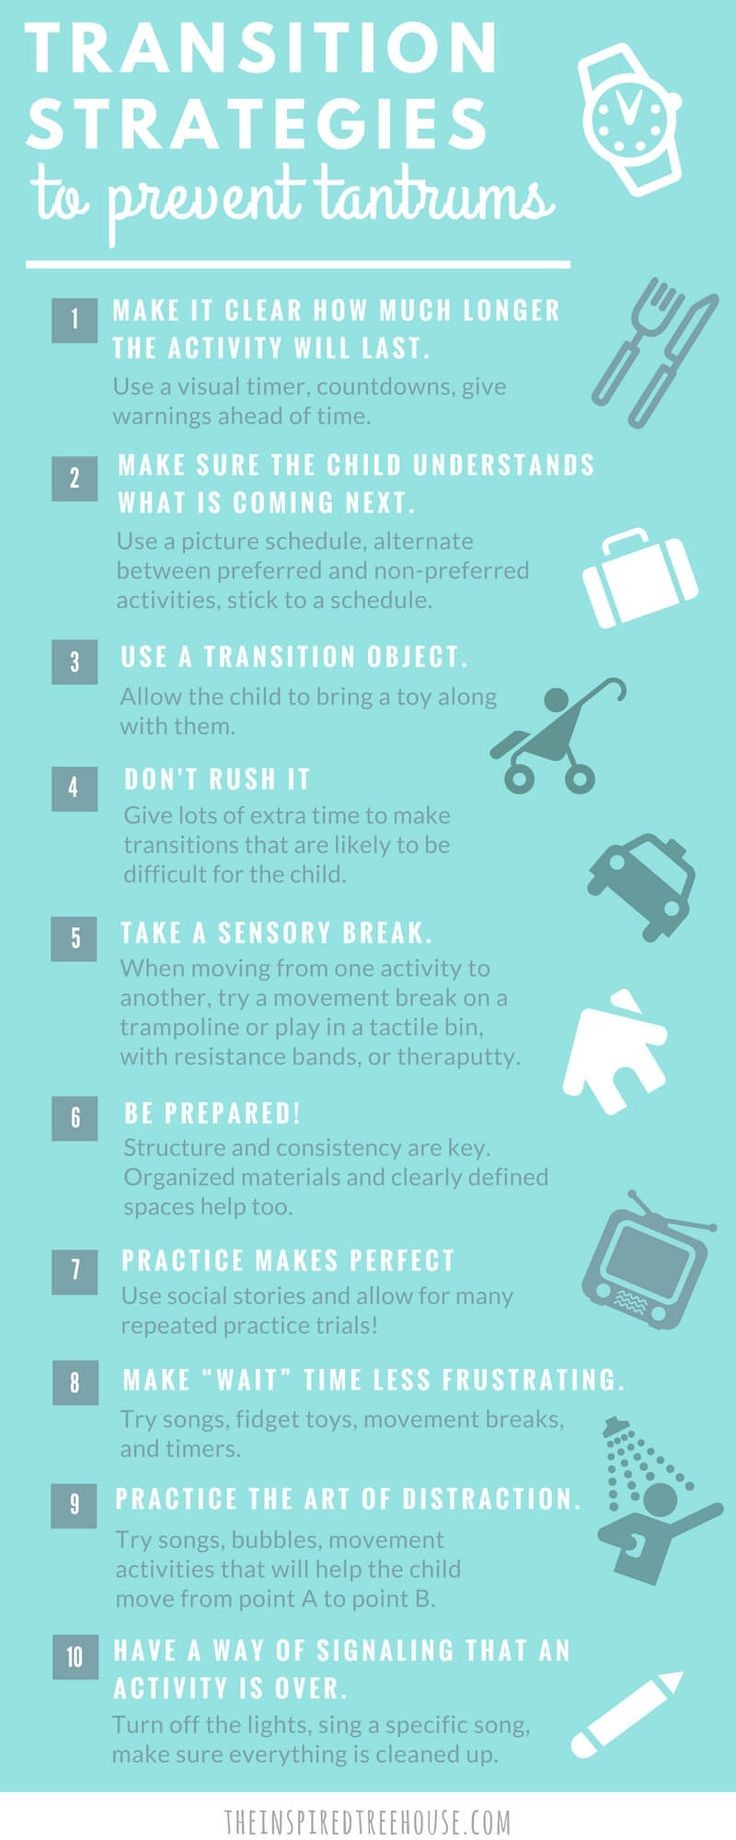 10 Calming Techniques and Transition Strategies for Kids